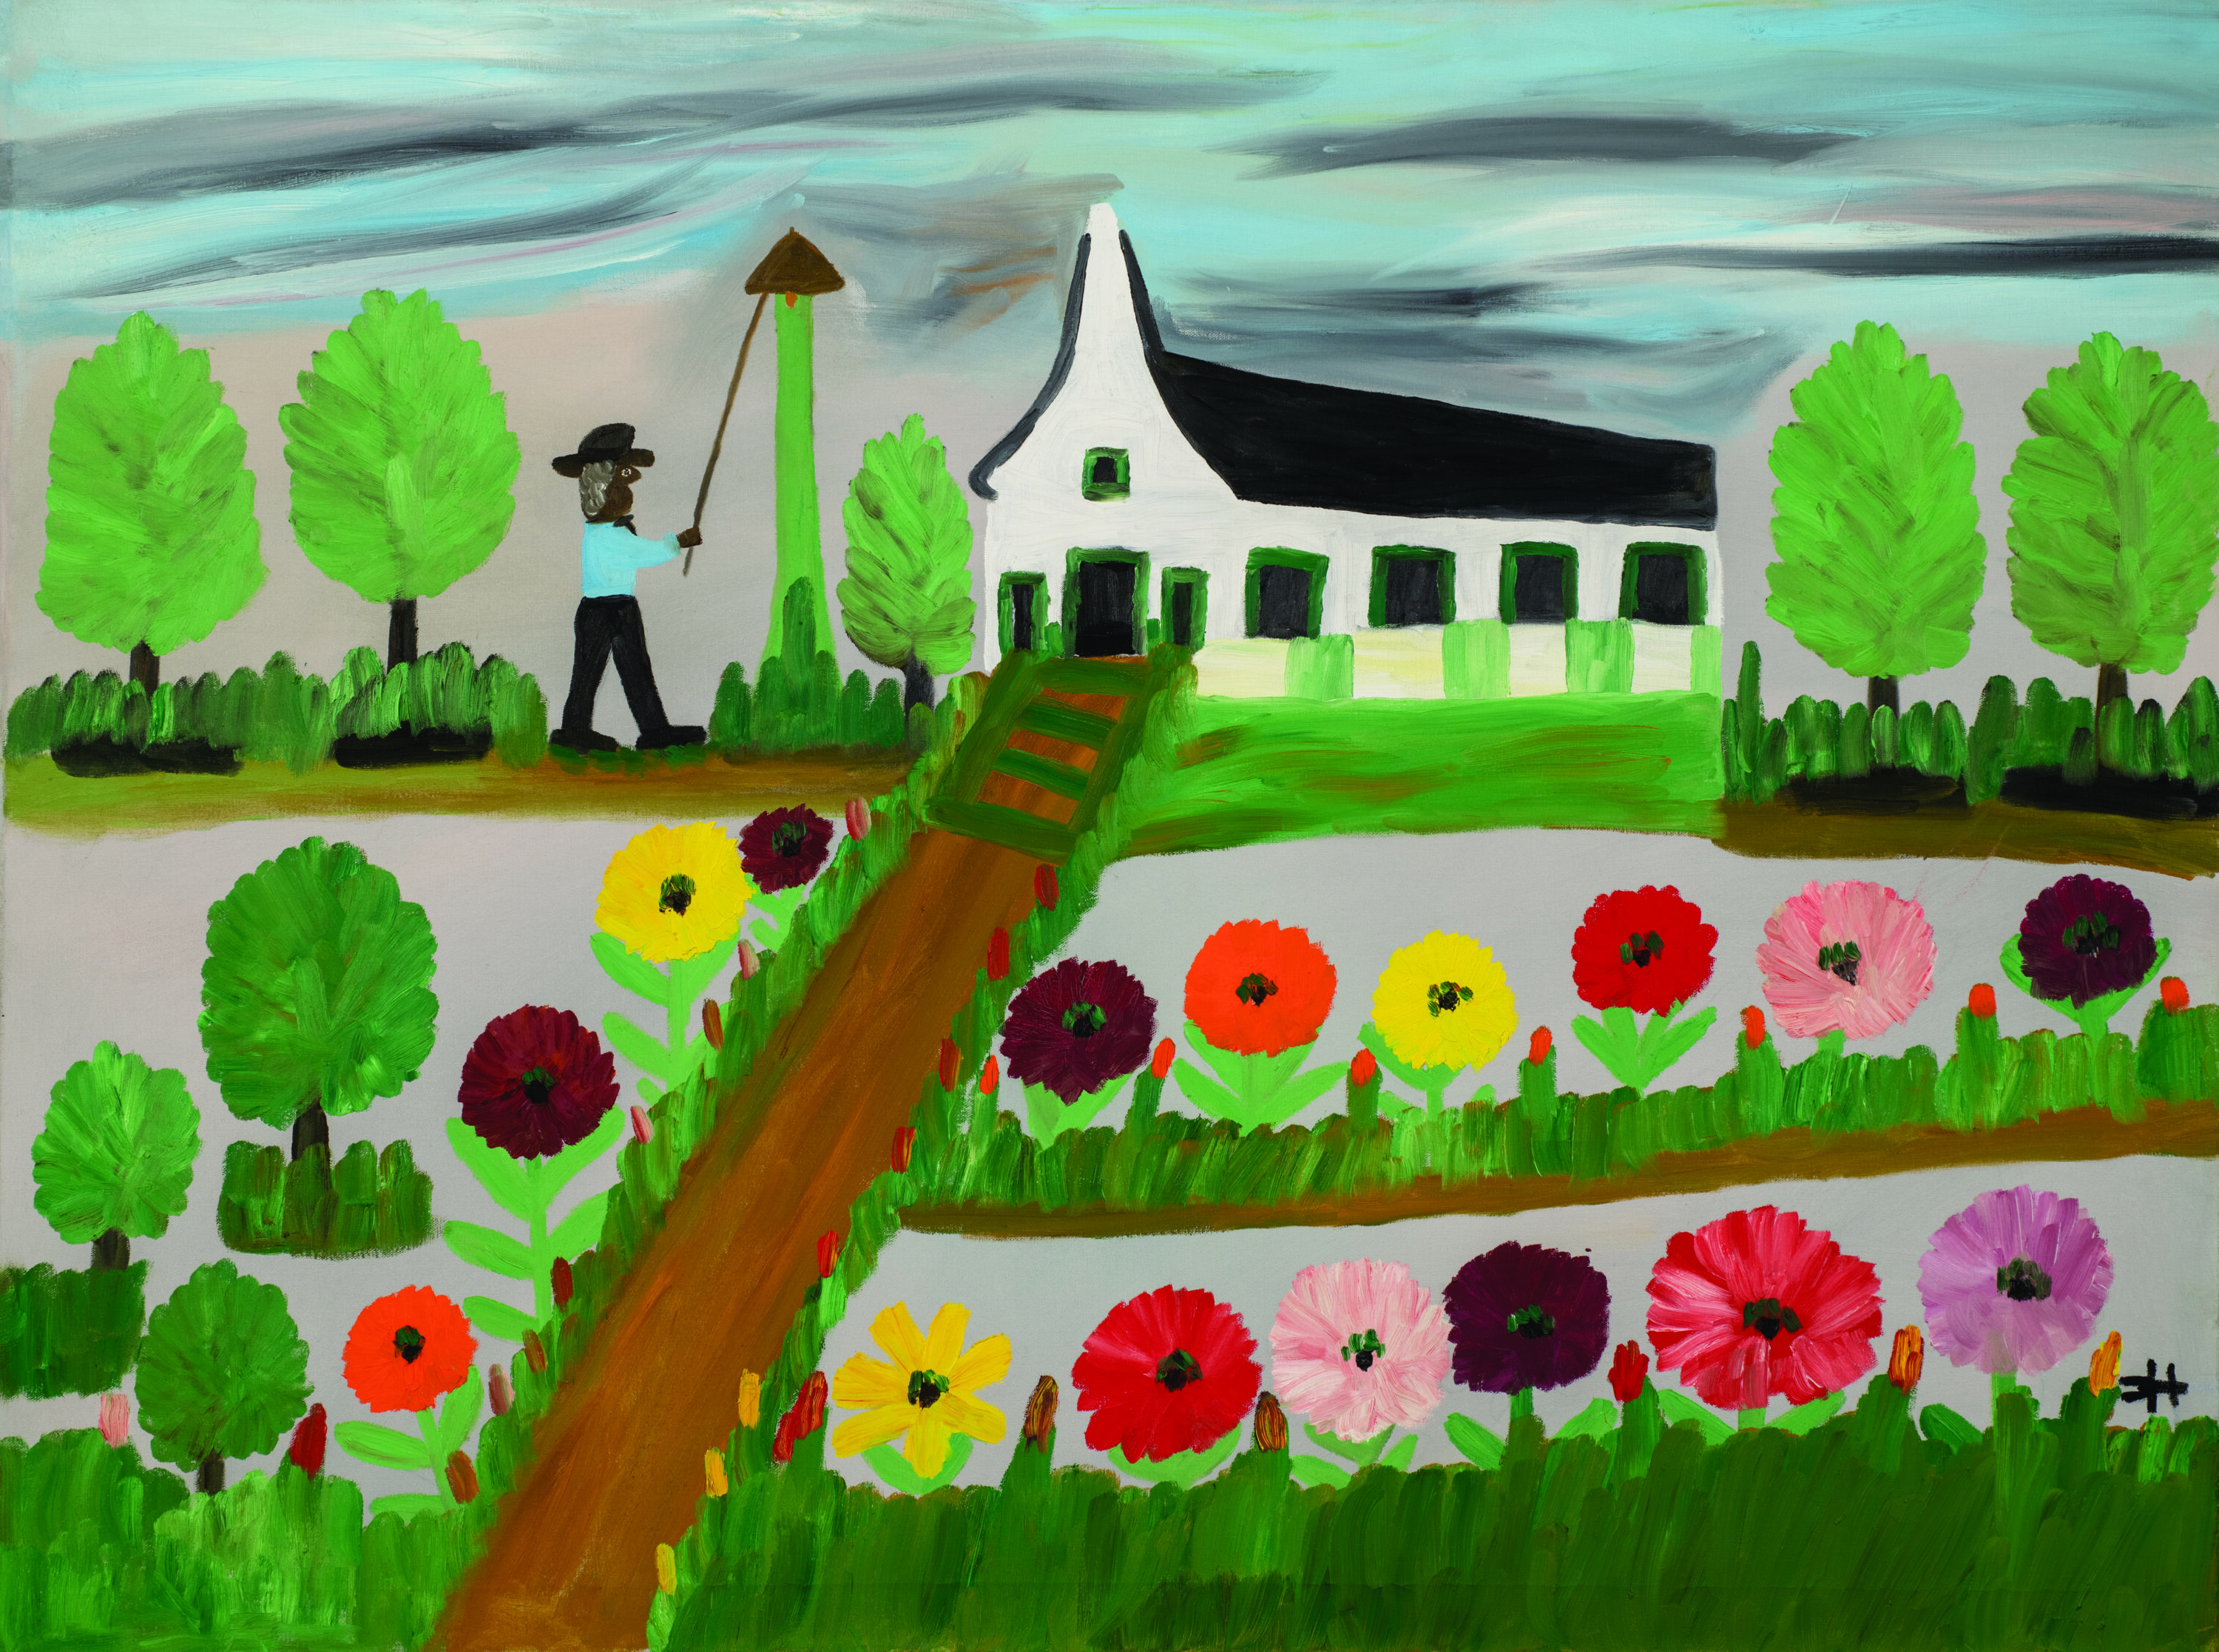 A painting in a folk or simple style features a dark-skinned person with a black hat ringing a bell in front of a white church with a black roof. The church is surrounded by greenery, and on either side of a brown path leading out of the church are vibrant yellow, red, pink, and orange flowers.